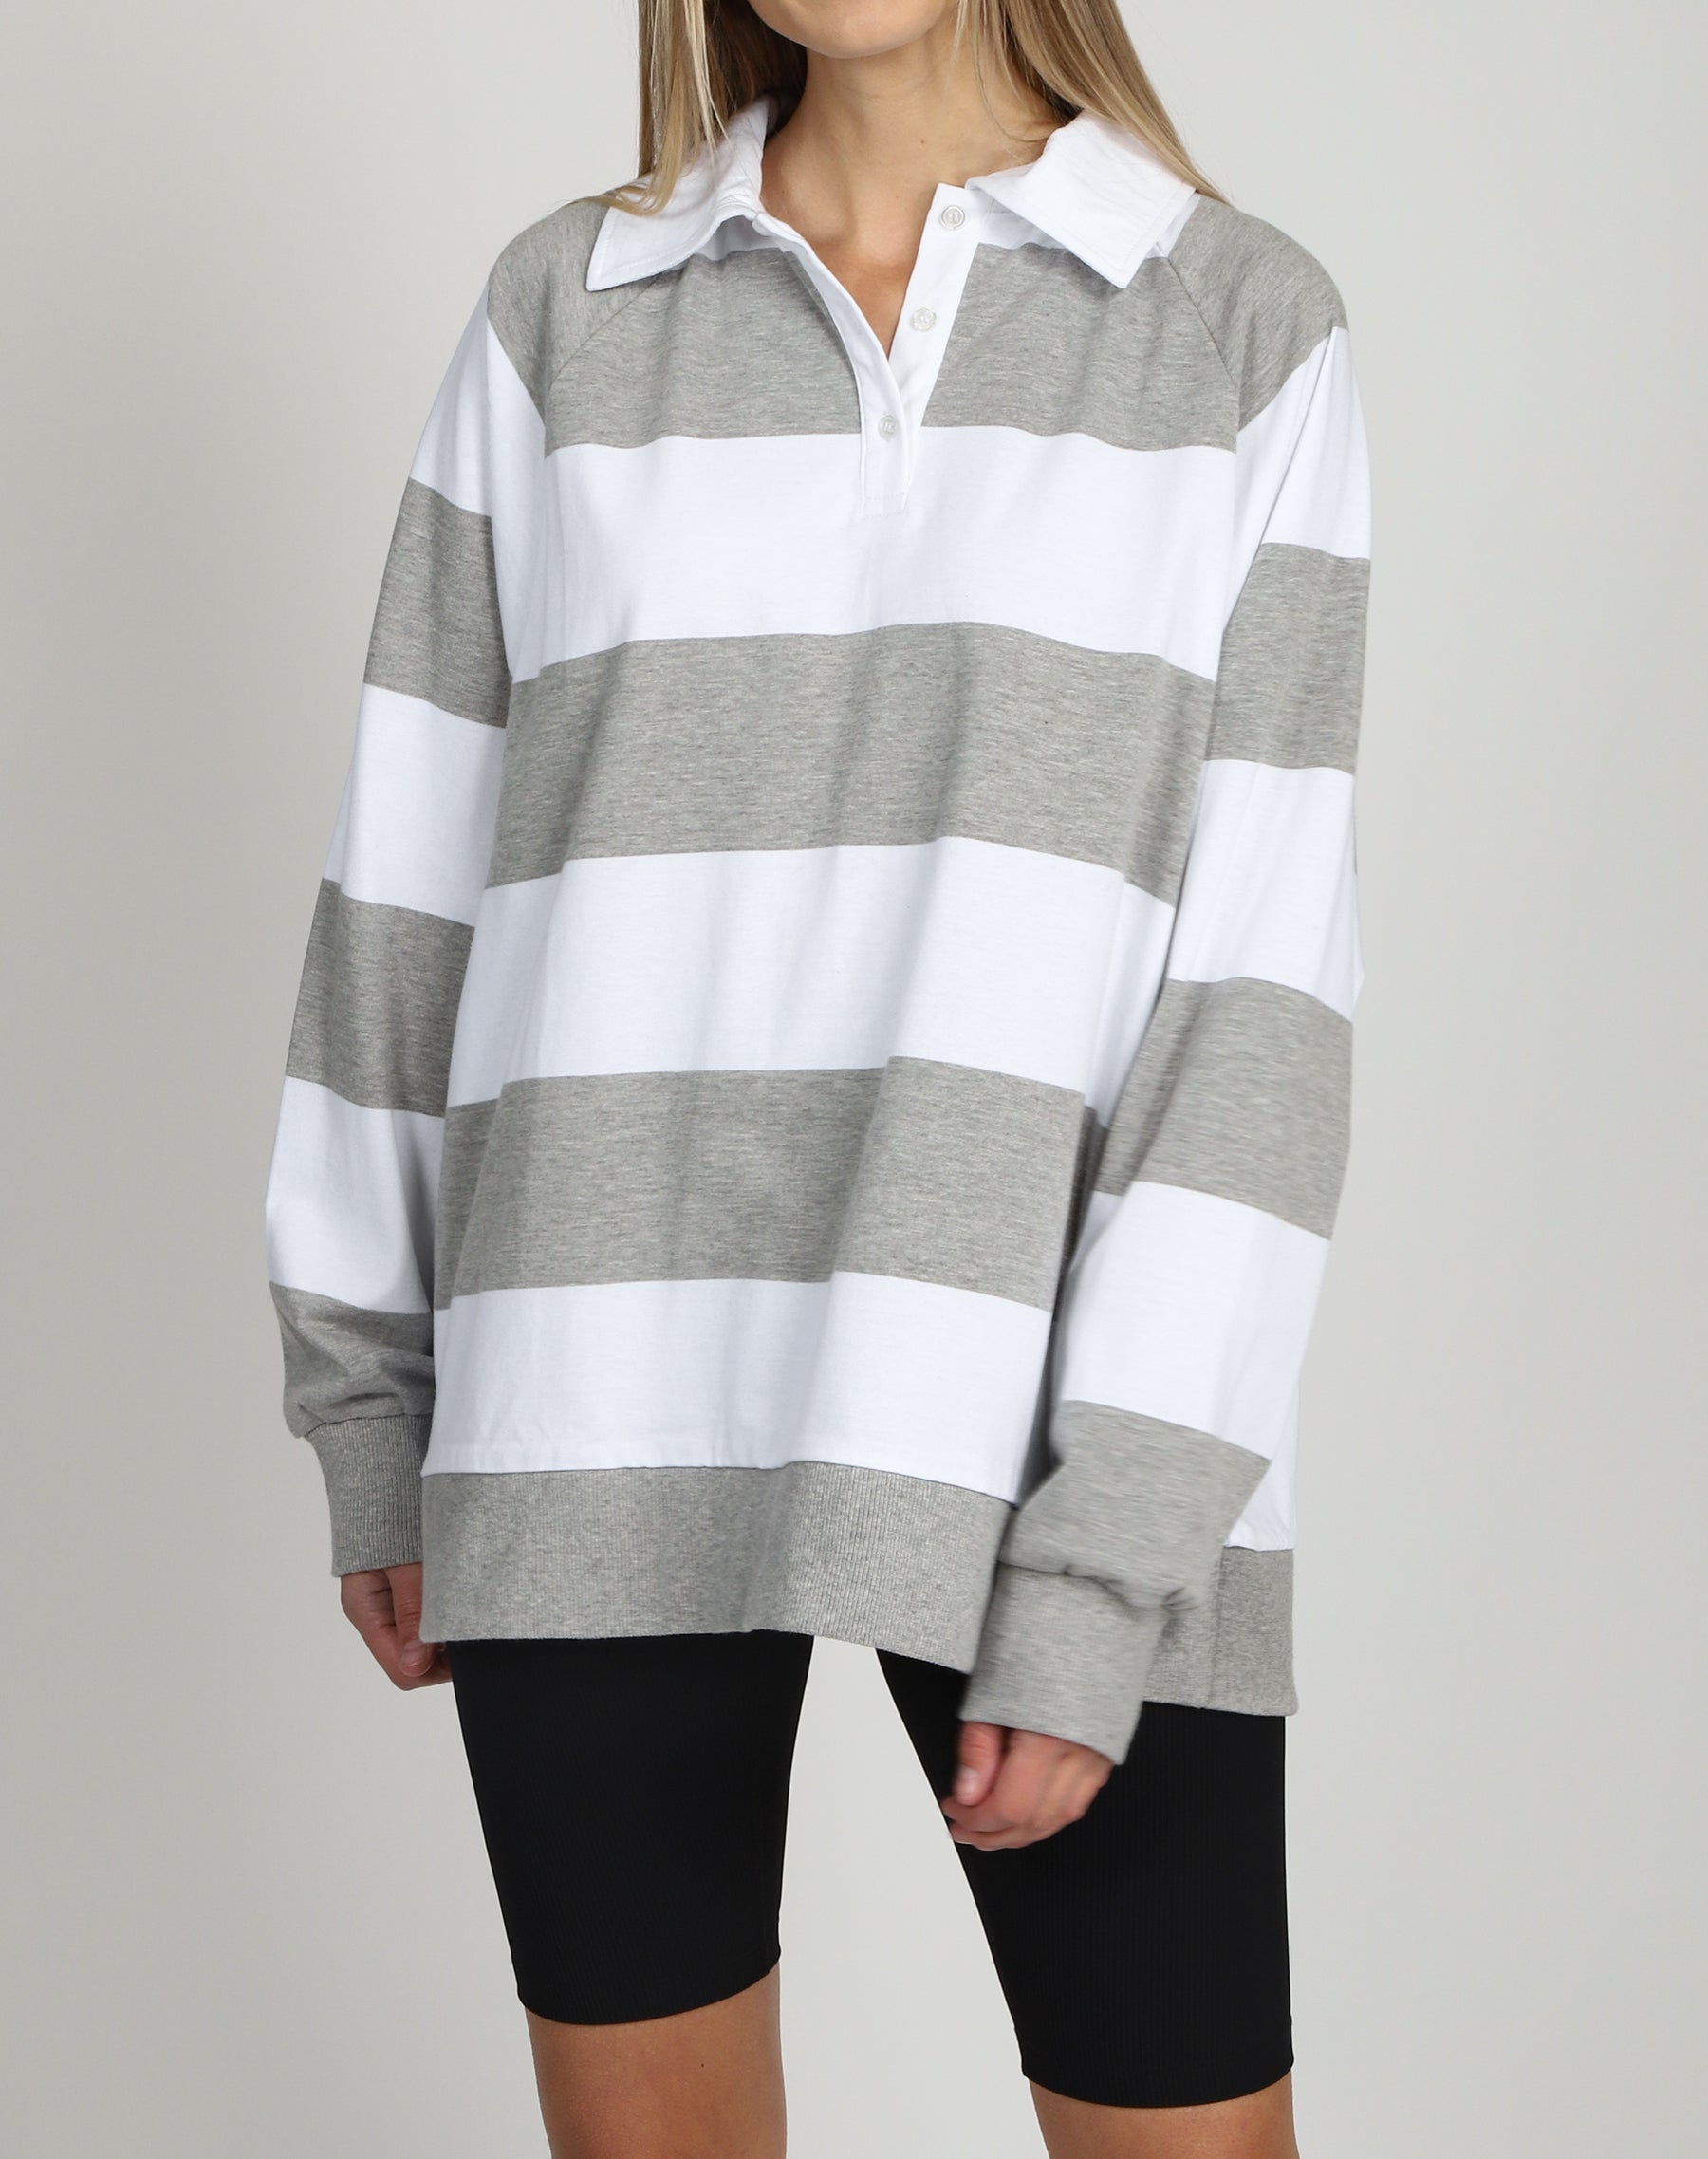 The Striped Rugby Shirt | Pebble Grey